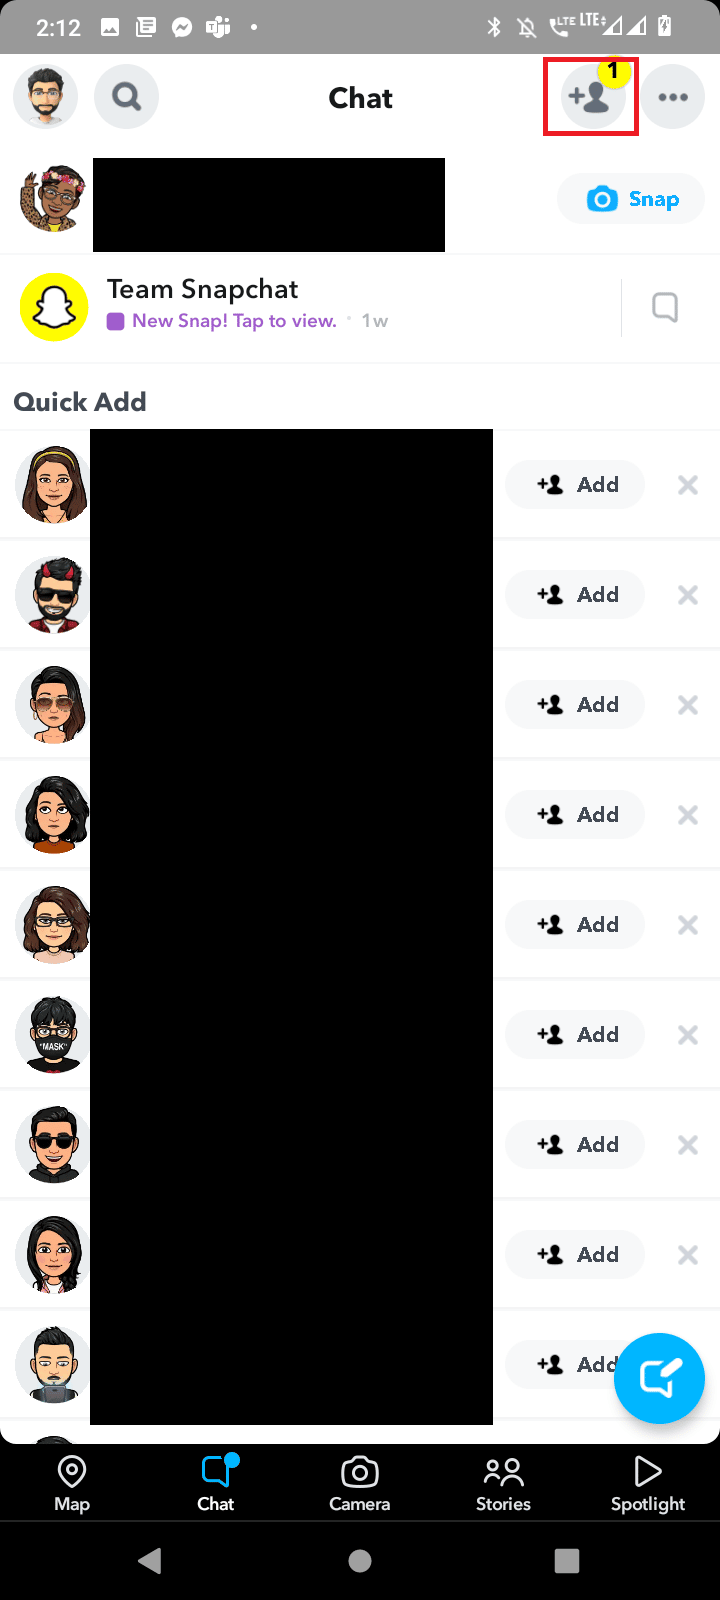 tap add friends icon. How to Find Someone on Snapchat Without Their Username